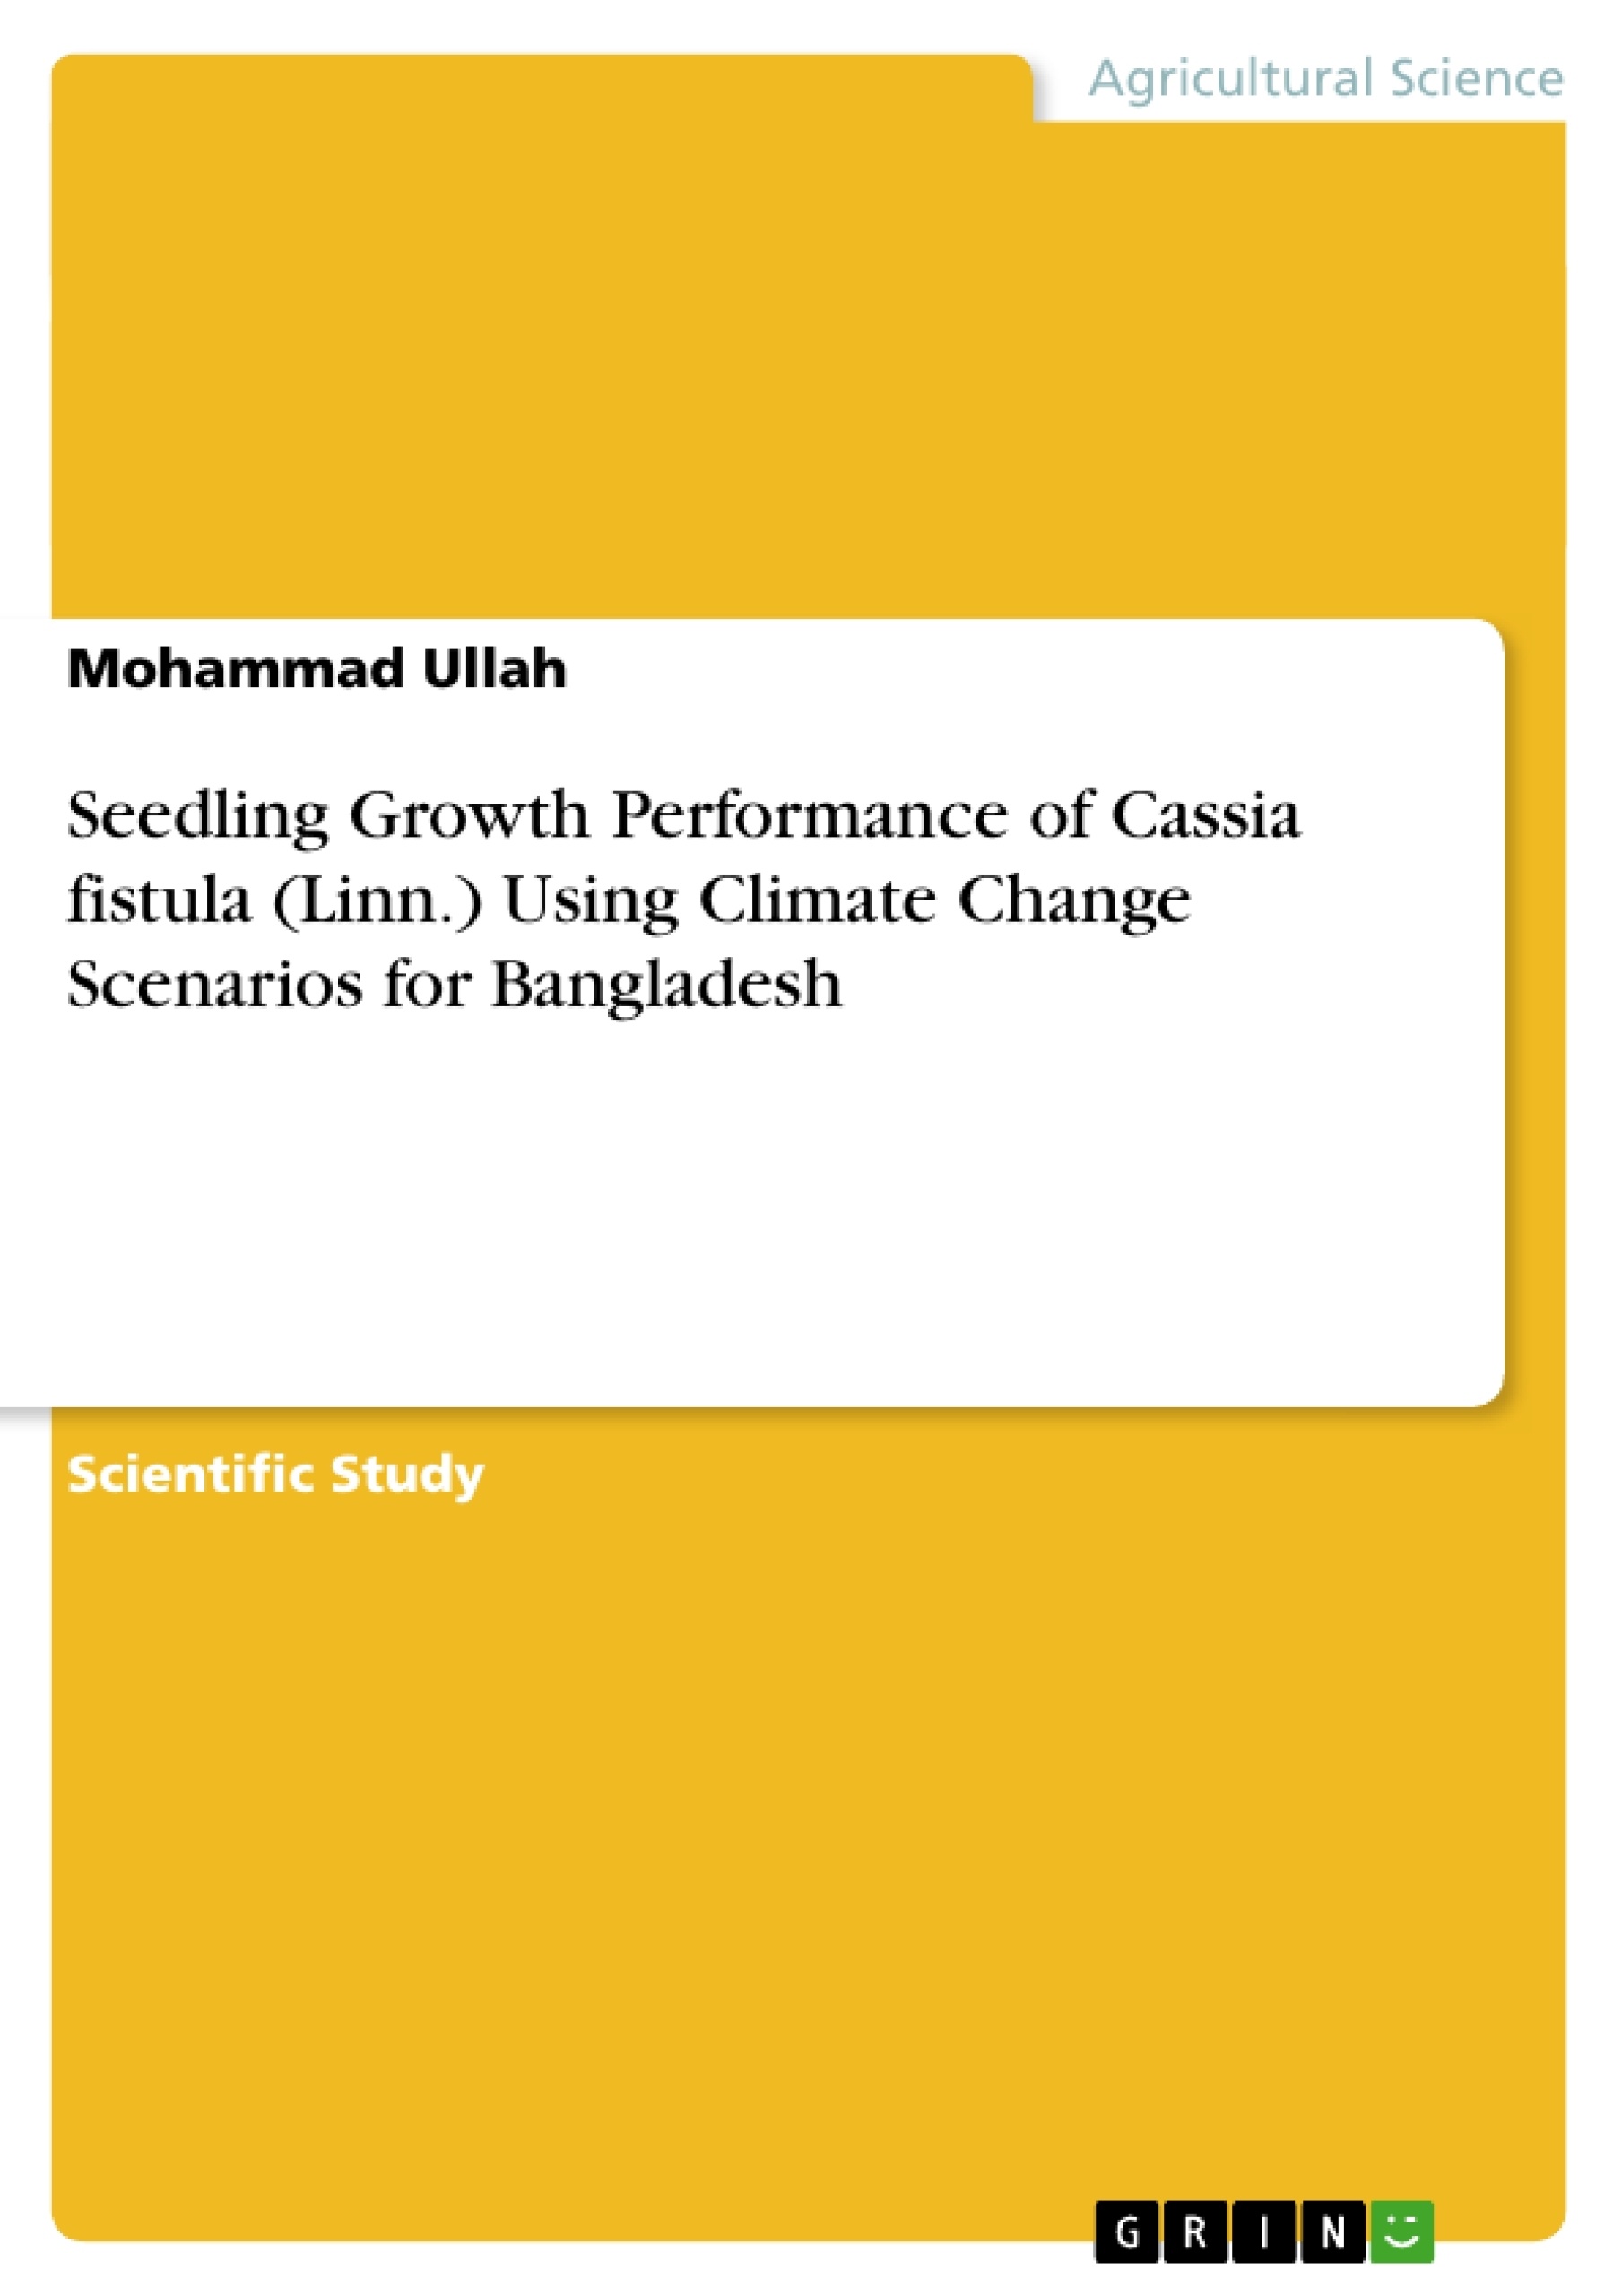 Title: Seedling Growth Performance of Cassia fistula (Linn.) Using Climate Change Scenarios for Bangladesh 